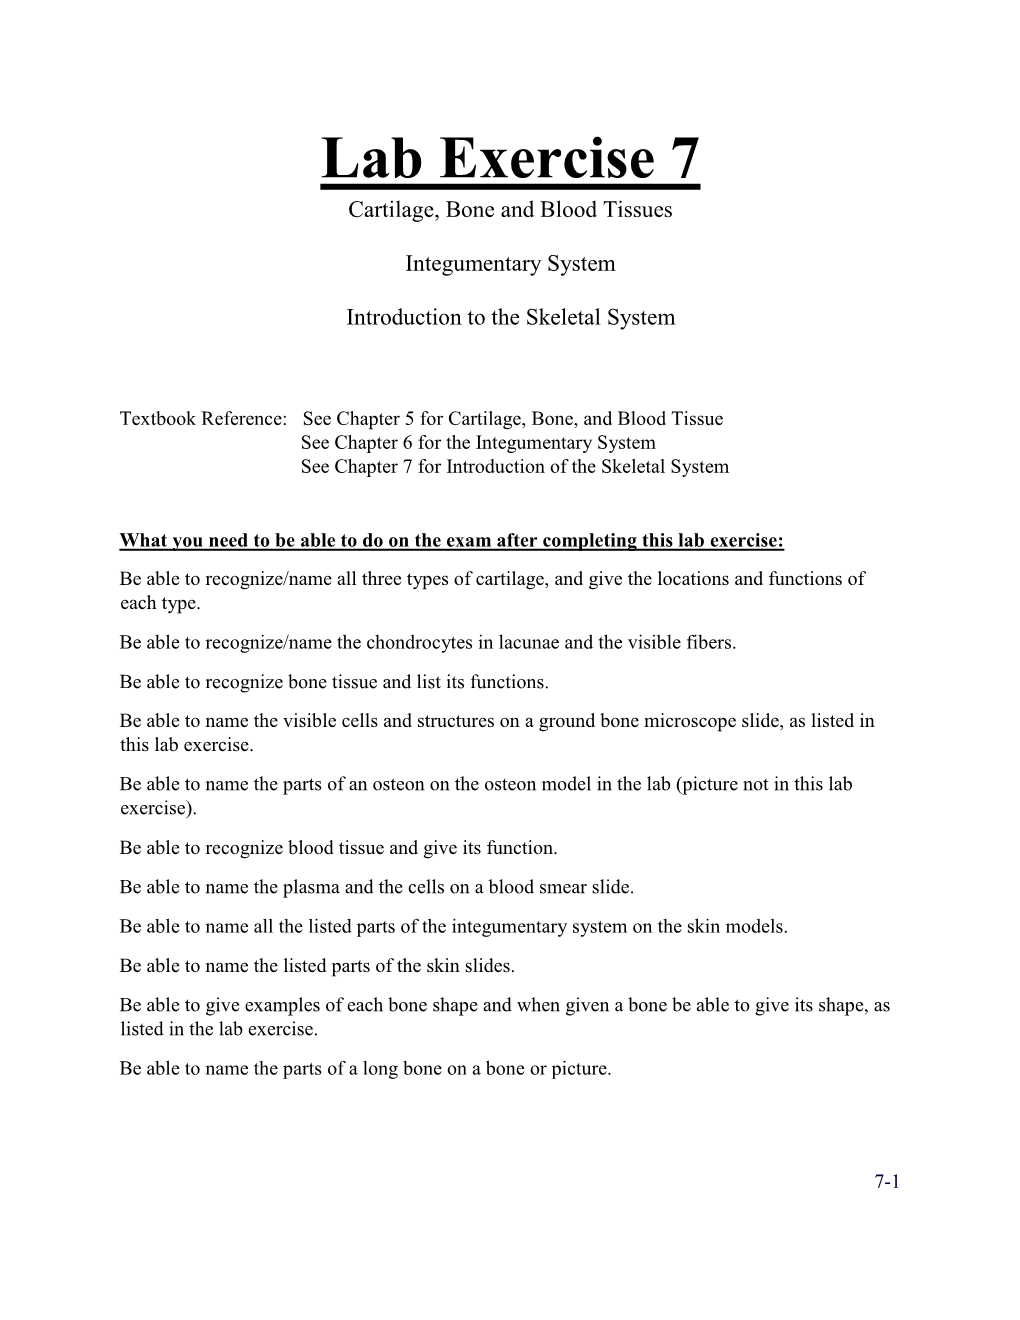 Lab Exercise 7 Cartilage, Bone and Blood Tissues